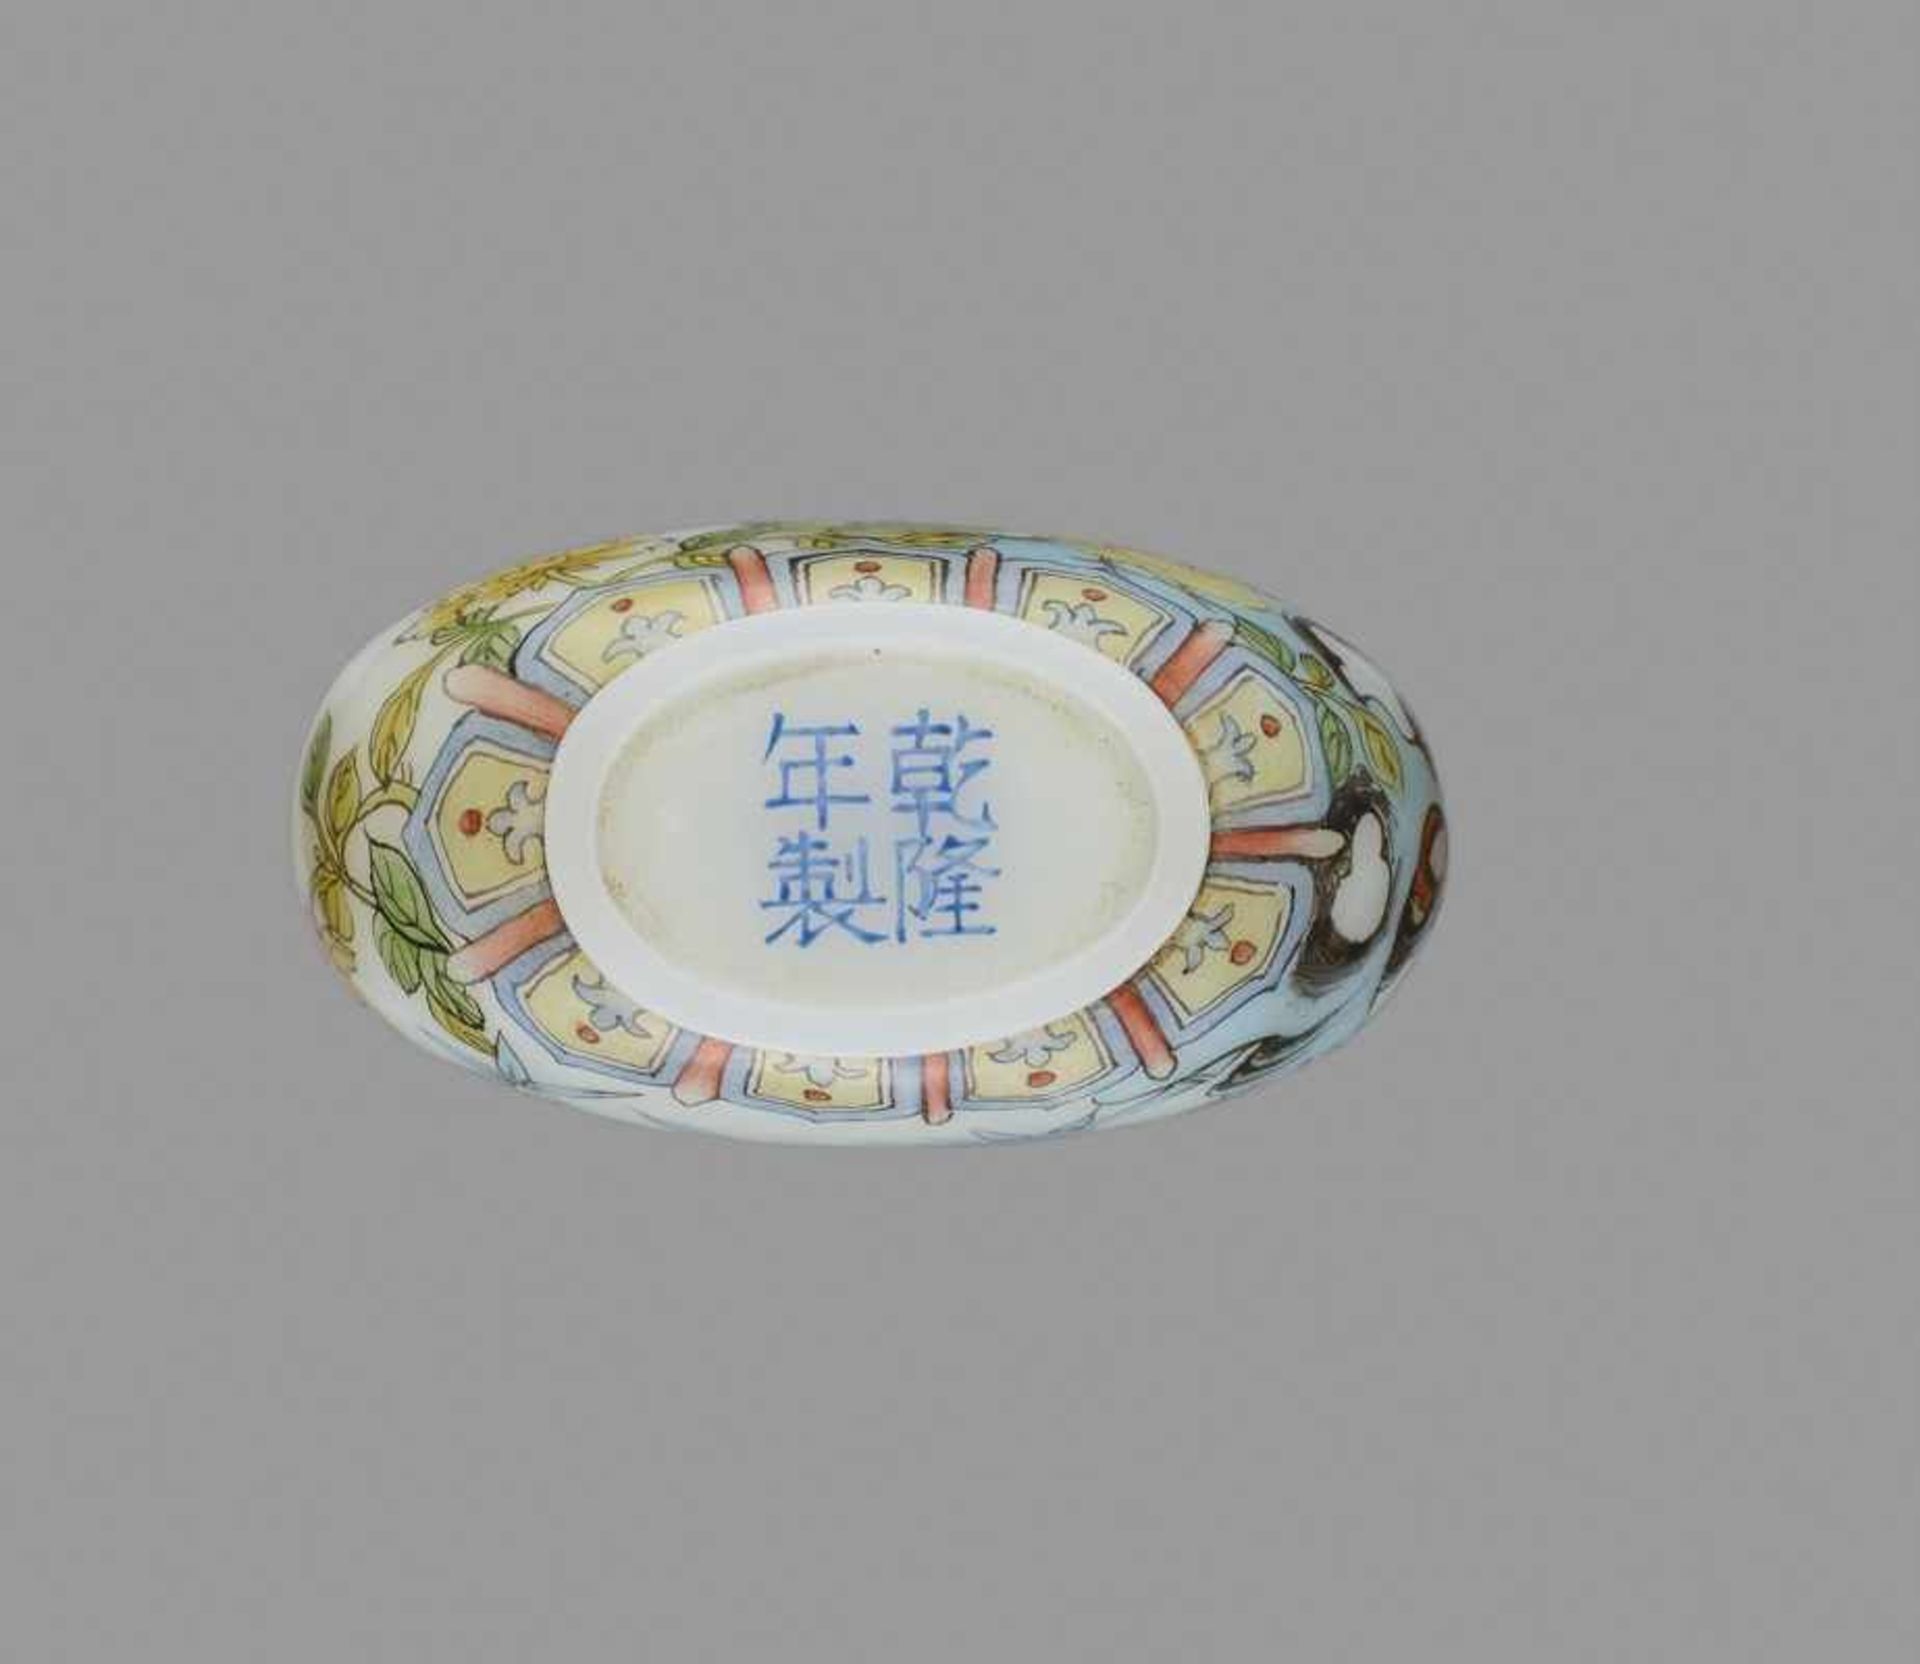 AN ENAMELED GLASS SNUFF BOTTLE, SCHOOL OF YE BENGQI Opaque white glass body with painted - Image 6 of 6